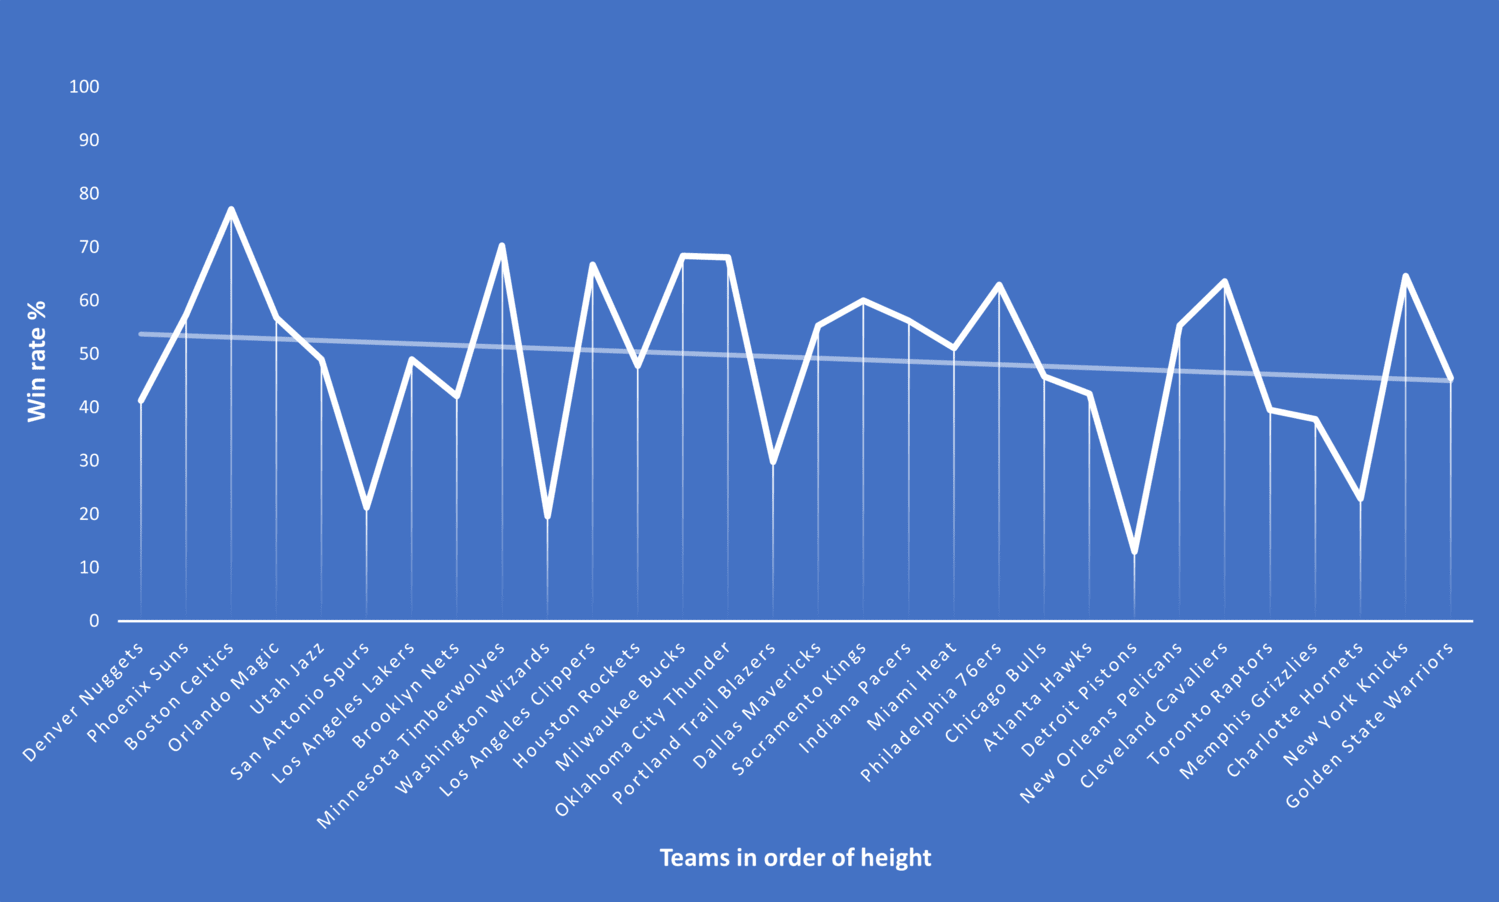 Casino.org graph showing 2022/23 win rate percentage vs average team height